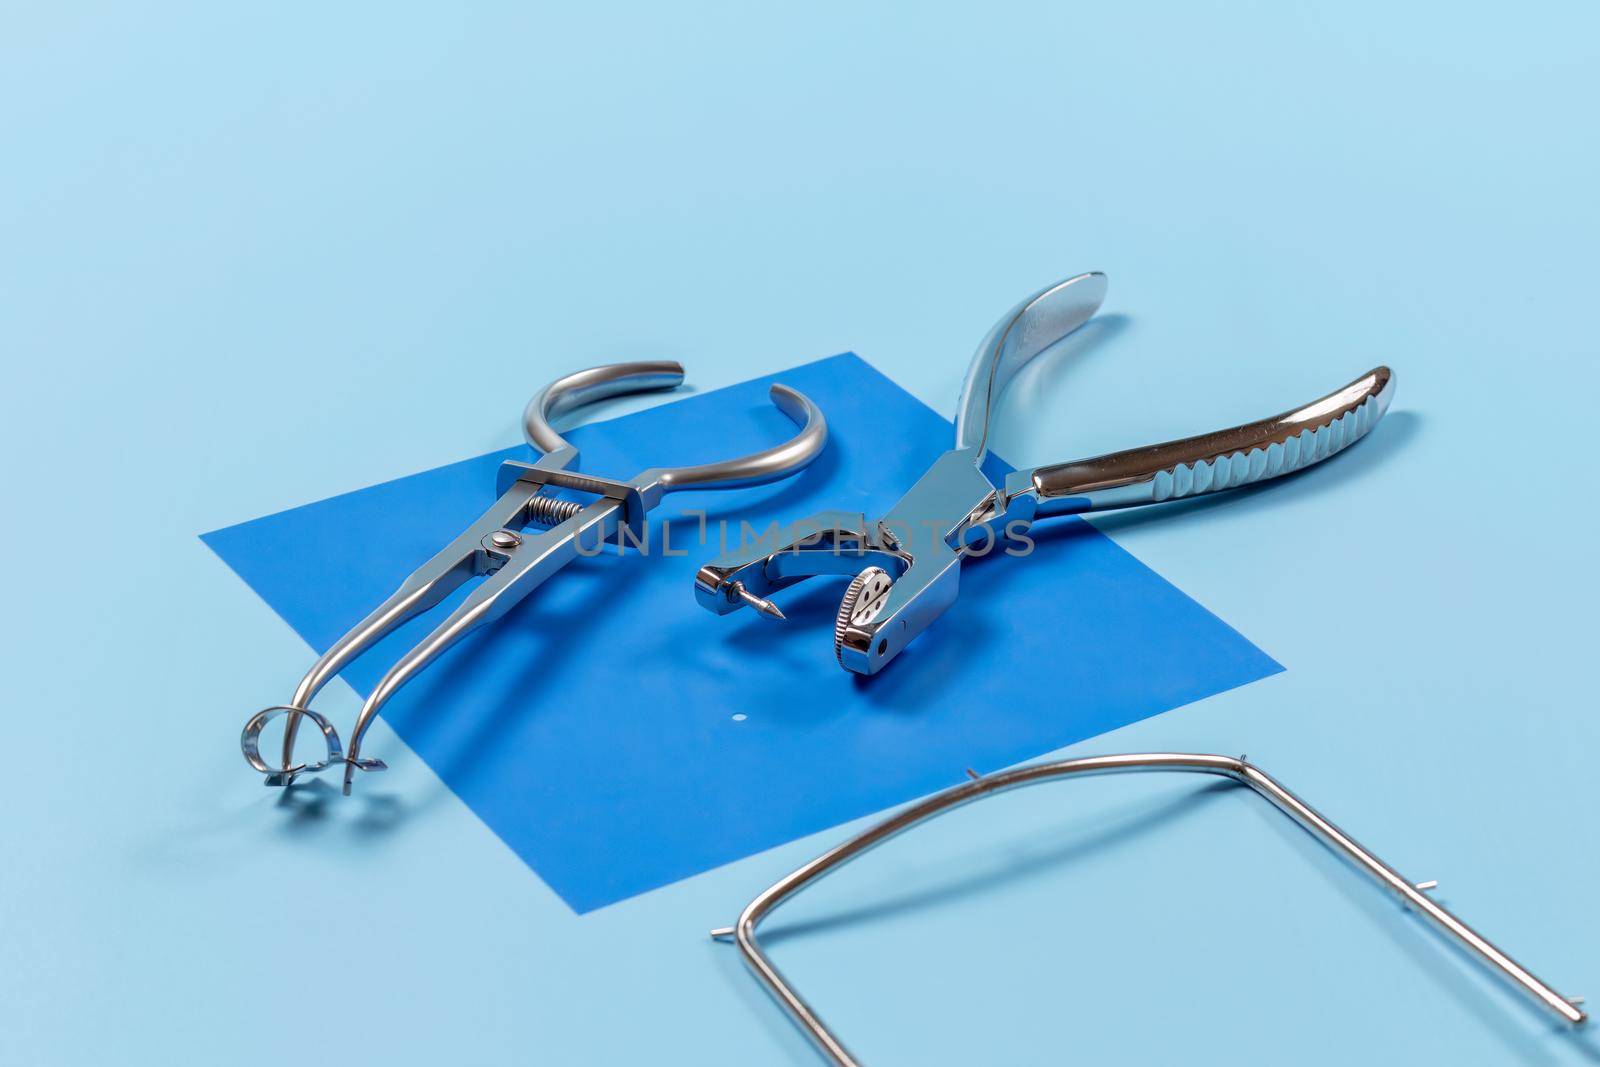 Dental hole punch, a rubber dam forceps with the clamp on the blue rubber dam and the metal frame. Medical tools concept.